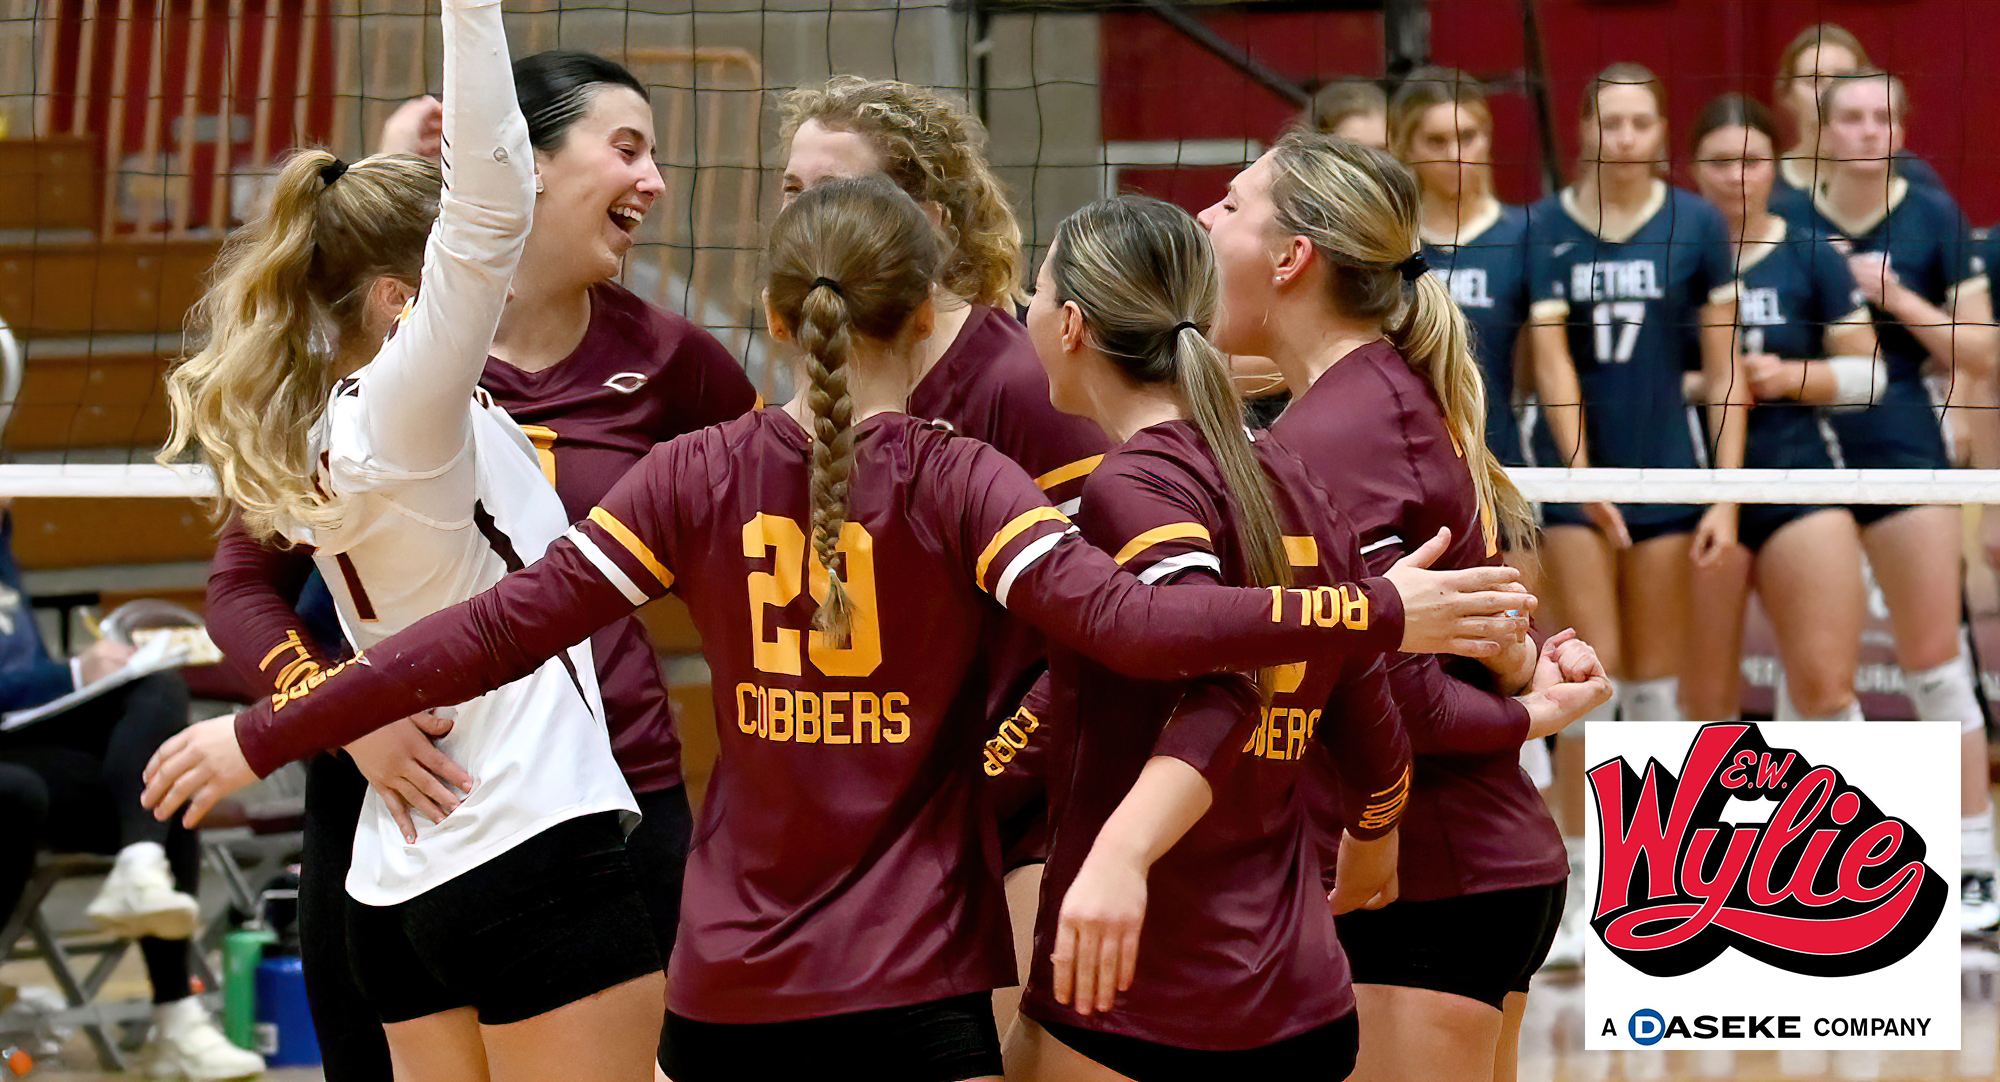 Concordia is all smiles after match point in their 3-2 win over Bethel. The victory moves CC into 5th place and is the first win over BU since 2013.